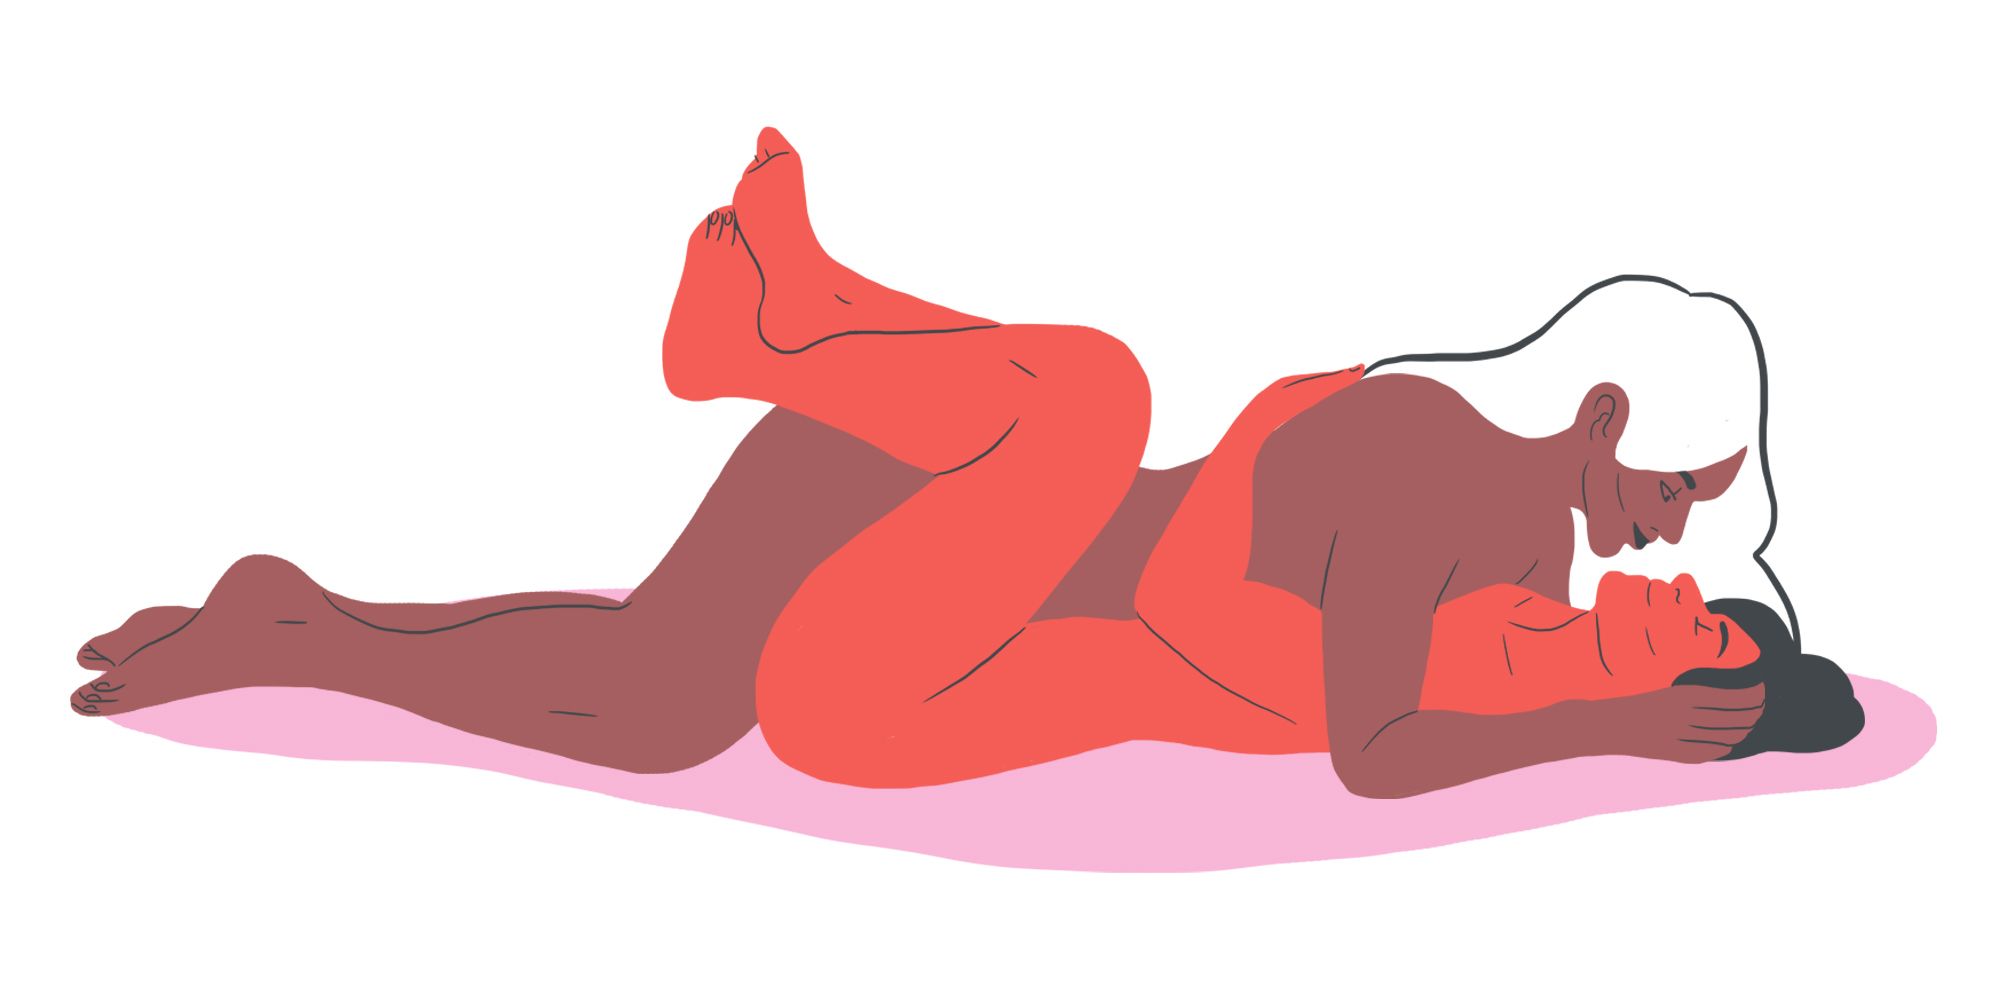 Sexual Intercourse Positions Drawings